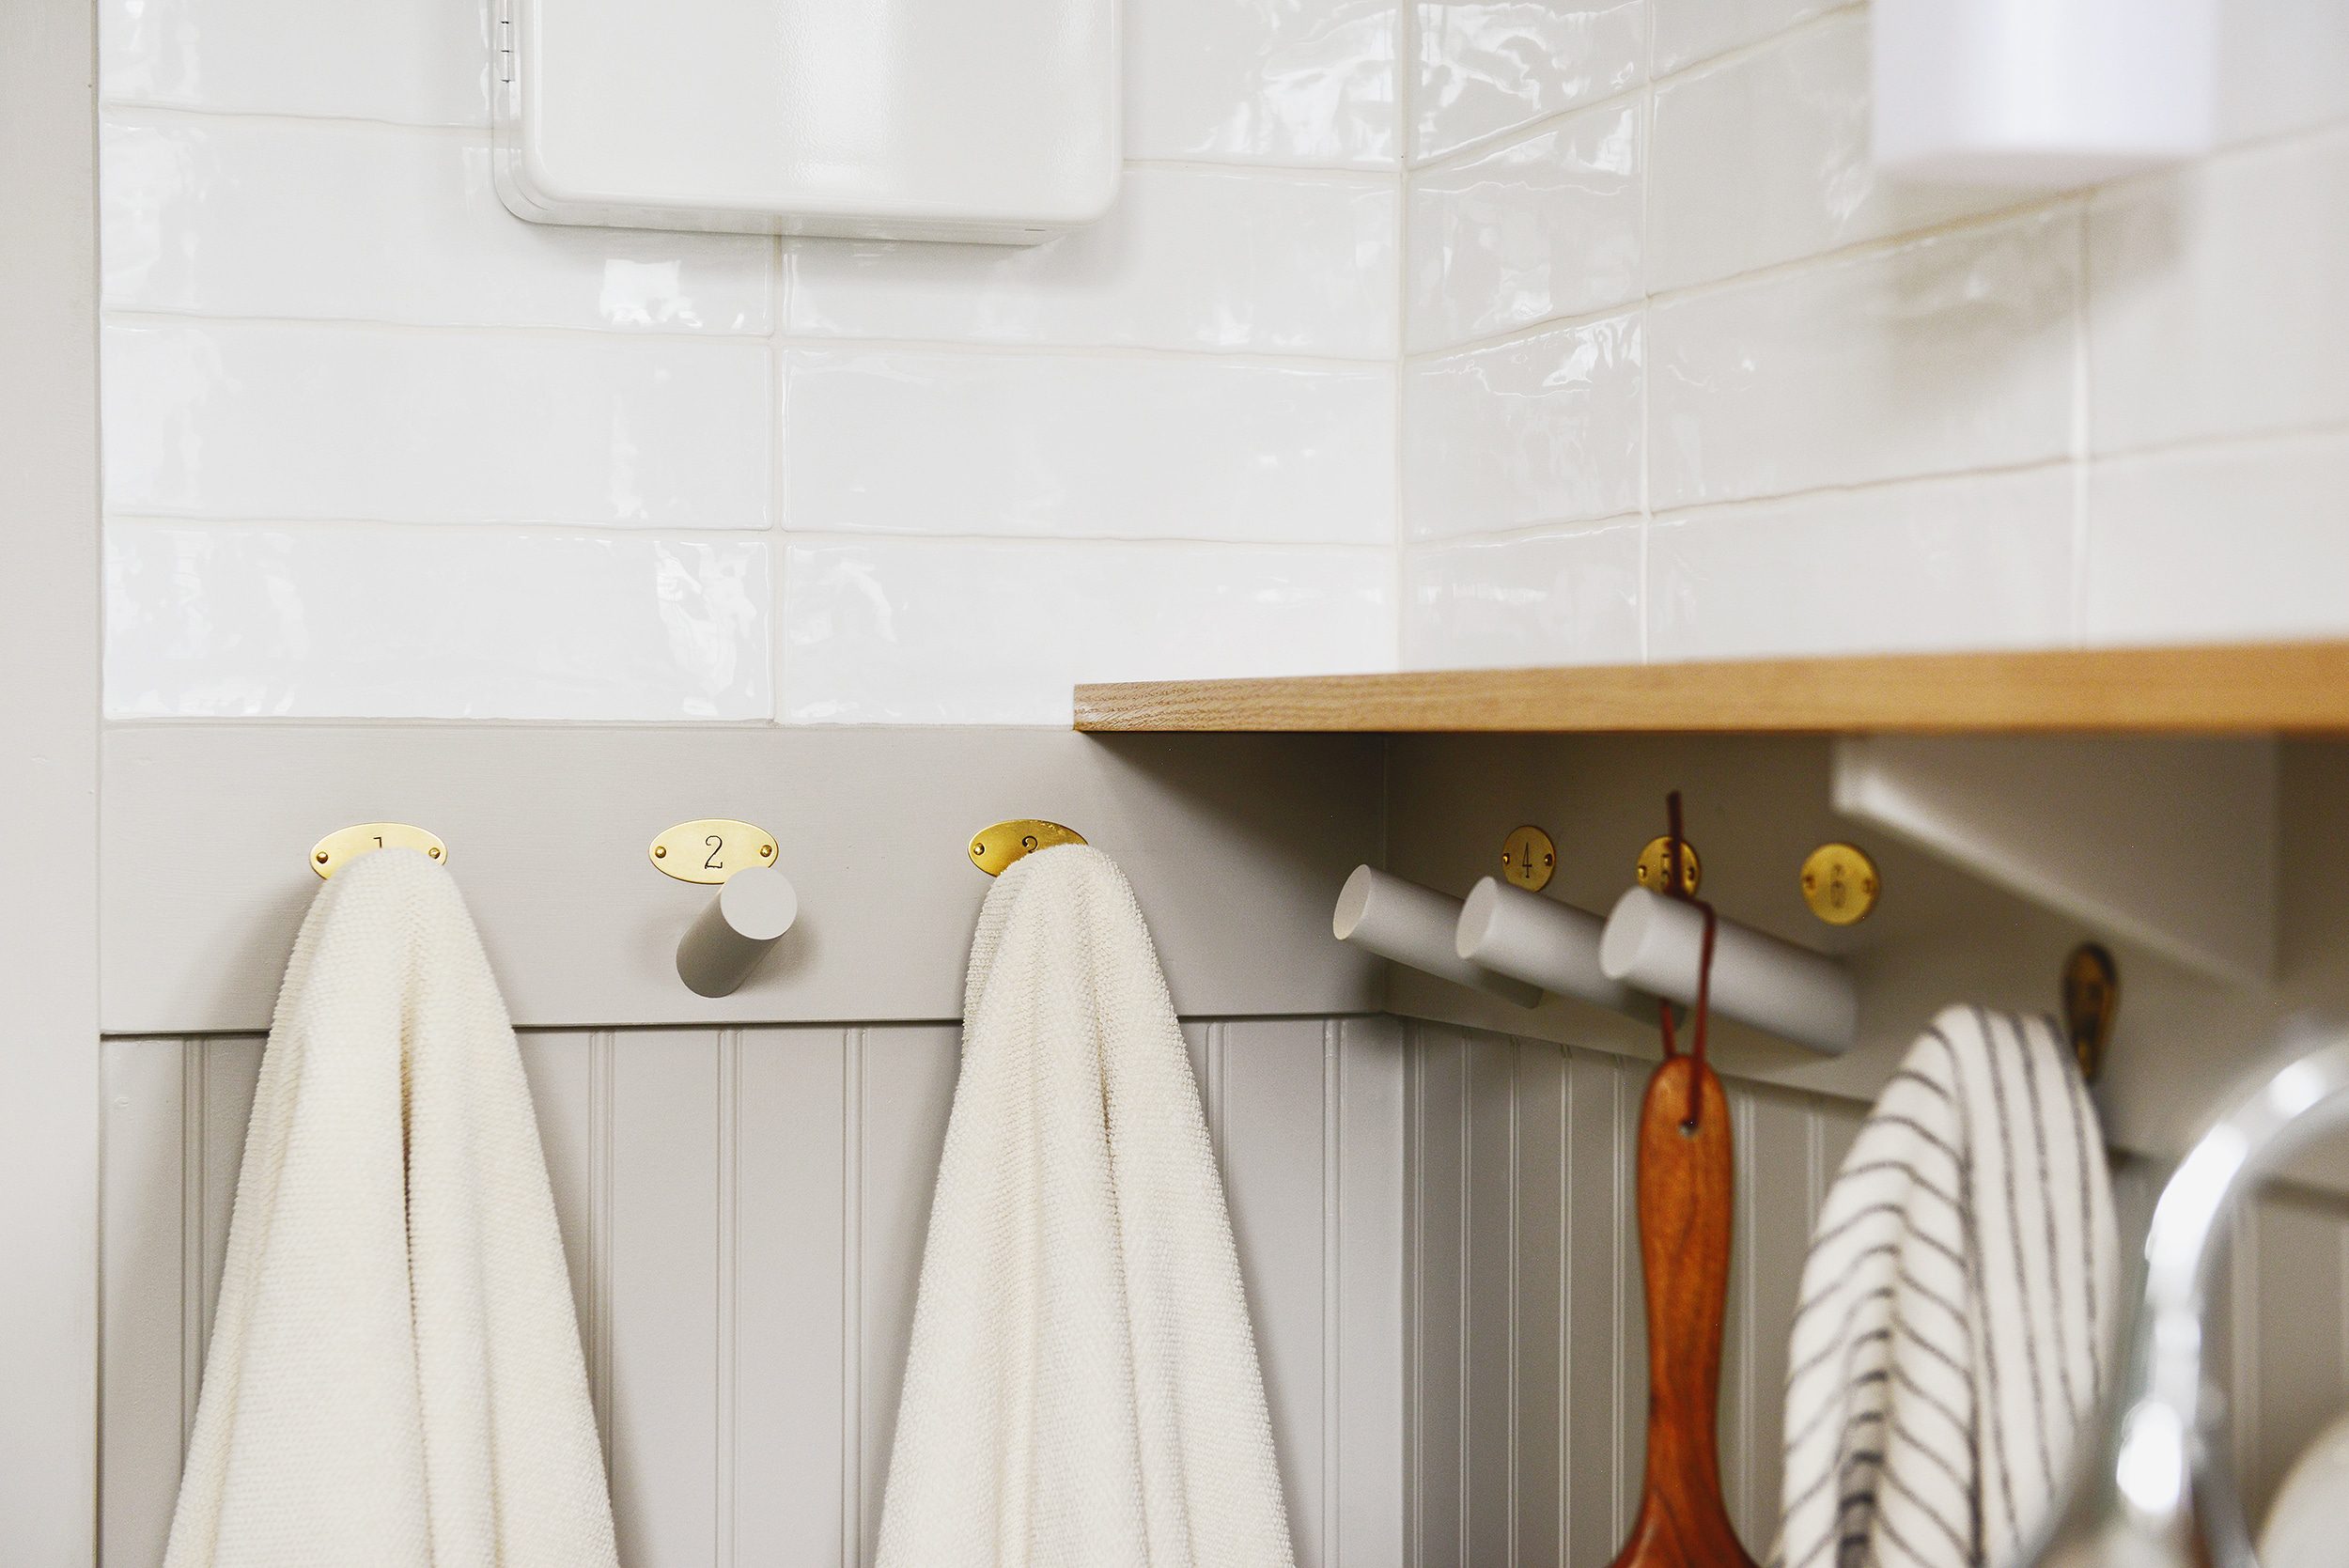 Beige towels hang on six wooden towel hooks integrated into a beadboard wall // via Yellow Brick Home